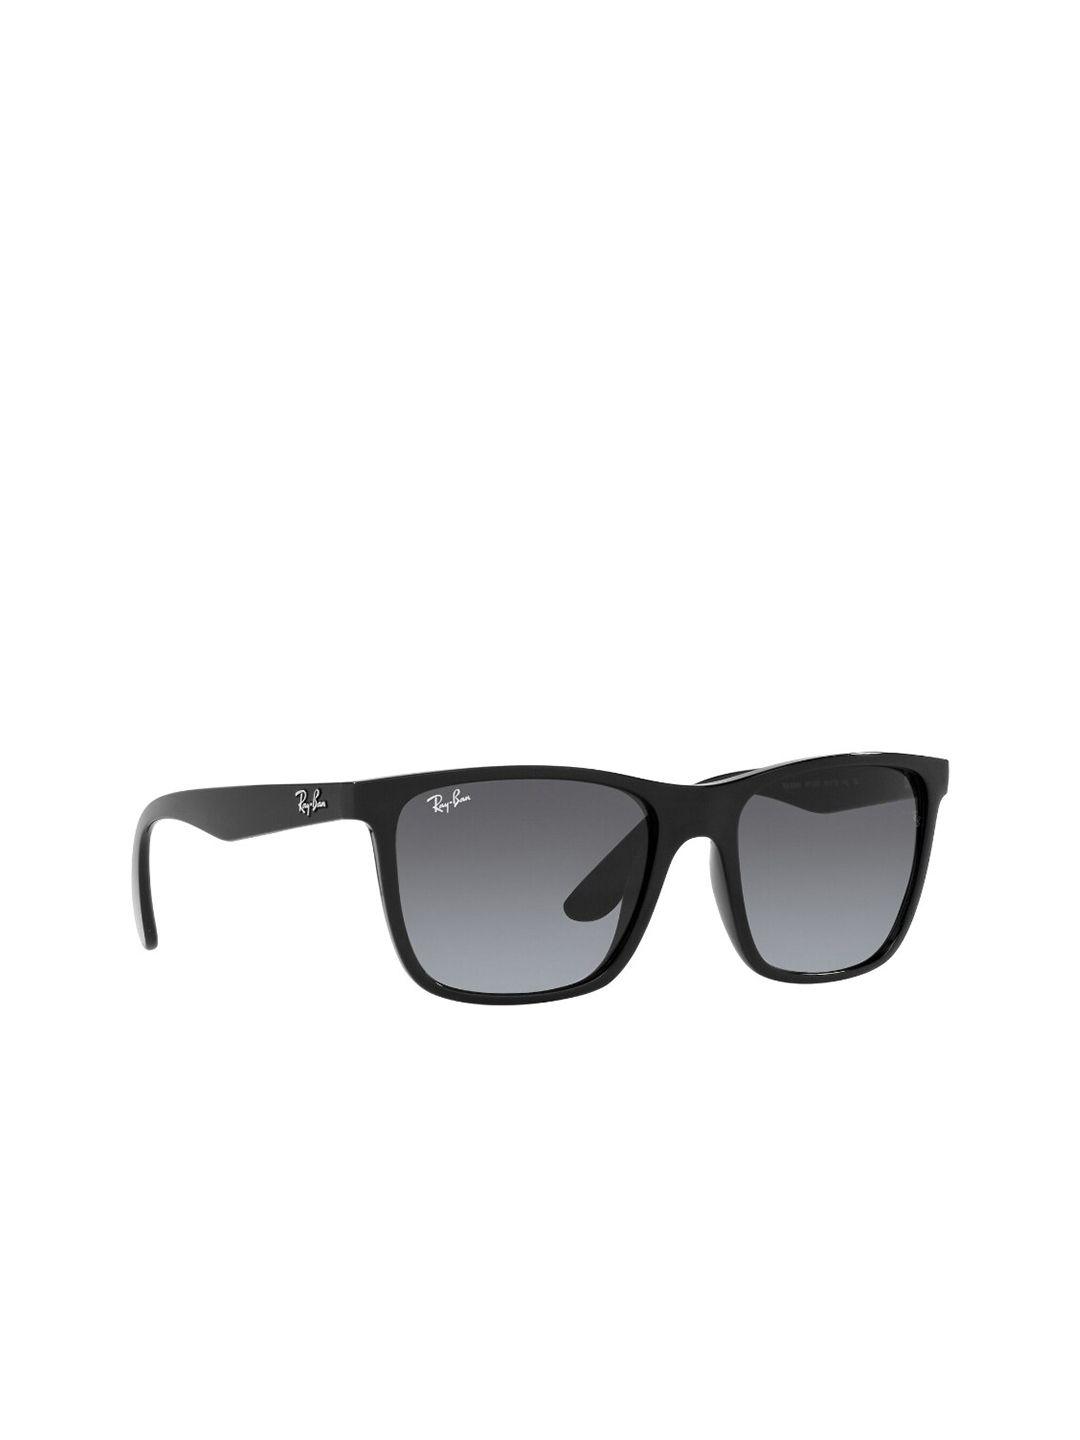 ray-ban-men-grey-lens-&-black-square-sunglasses-with-uv-protected-lens-8056597440493